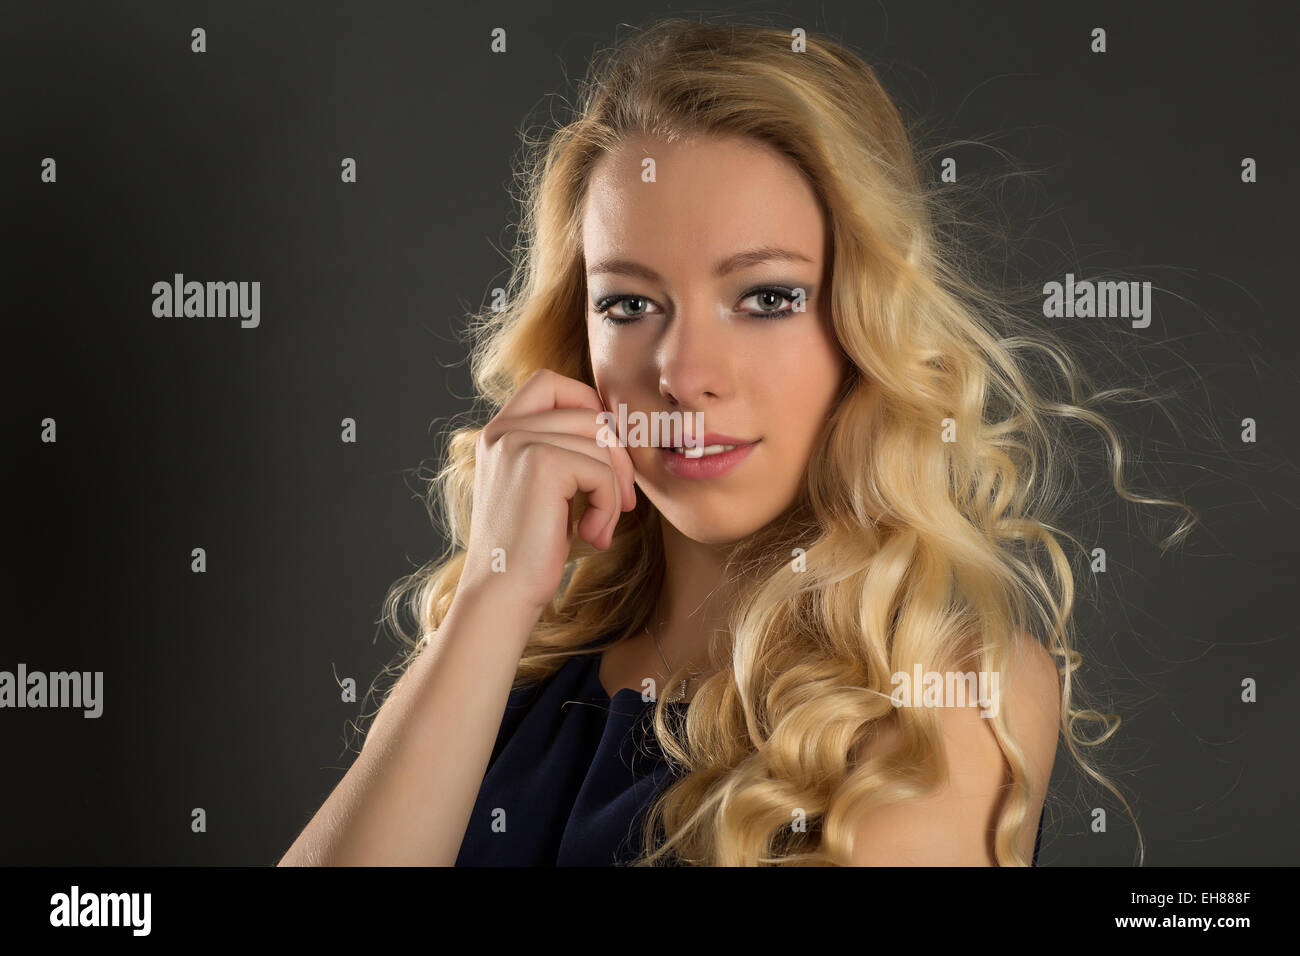 Young woman with long blond hair, portrait Stock Photo